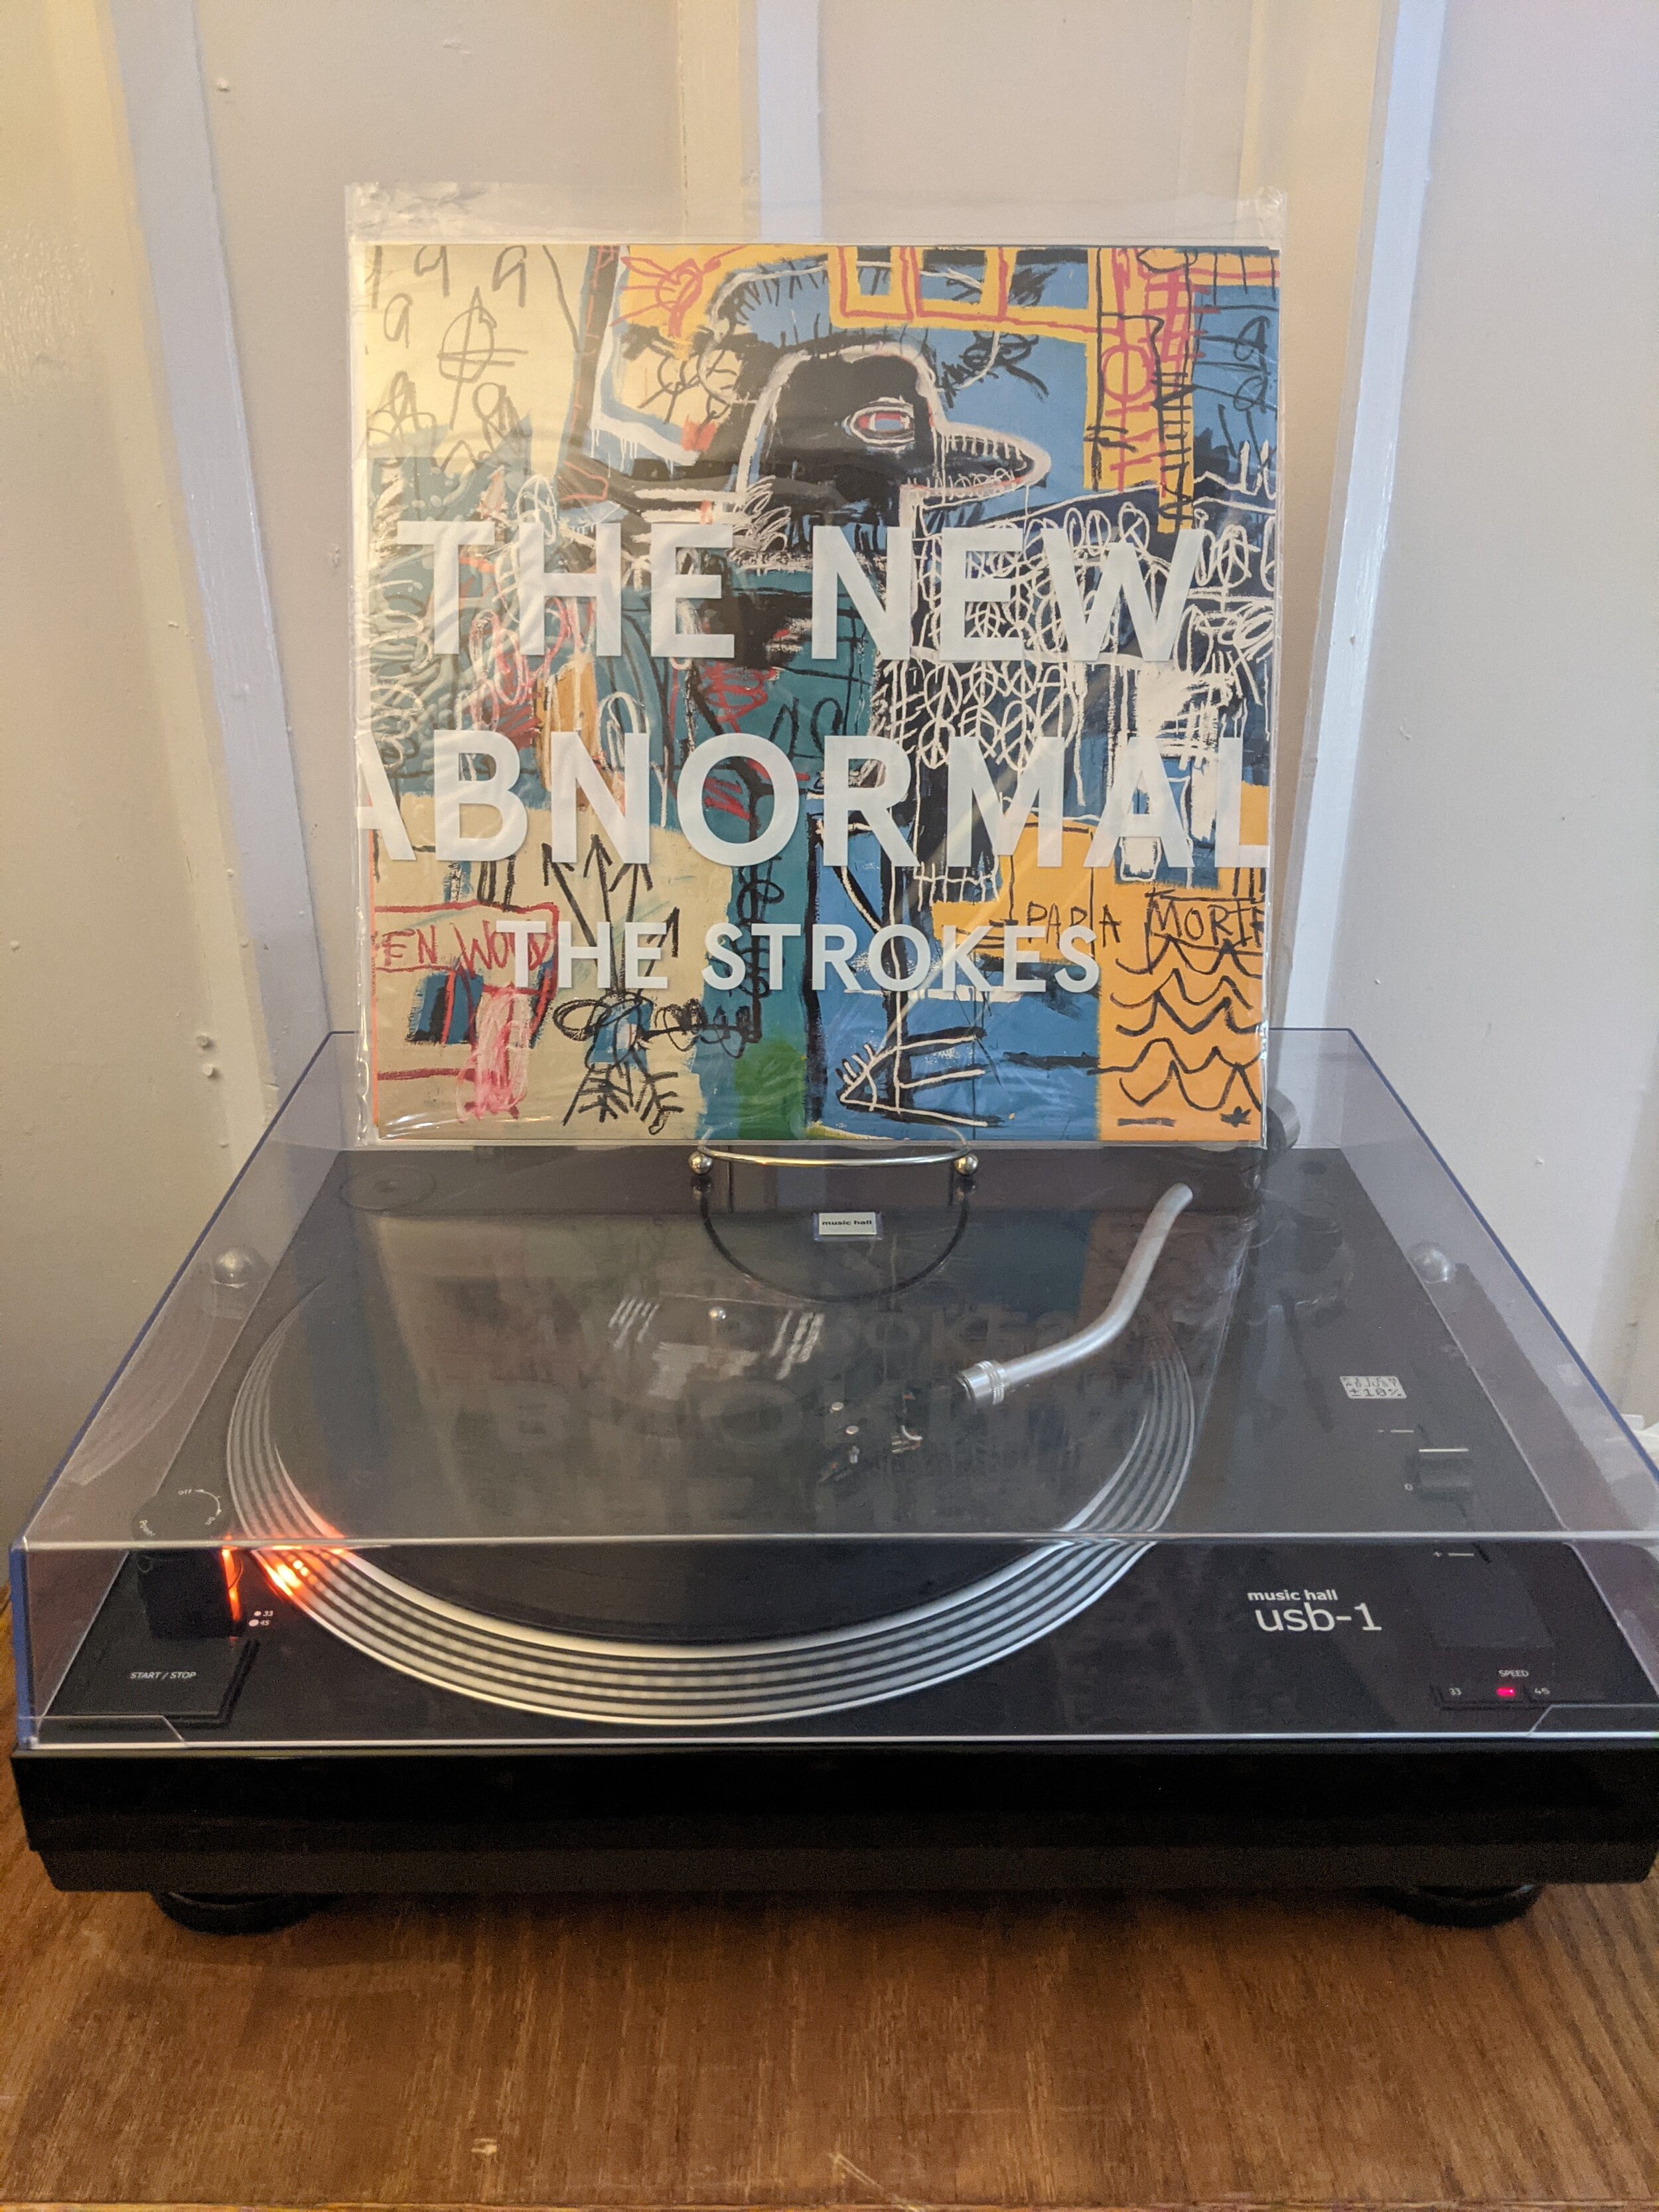 The Strokes - A New Abnormal